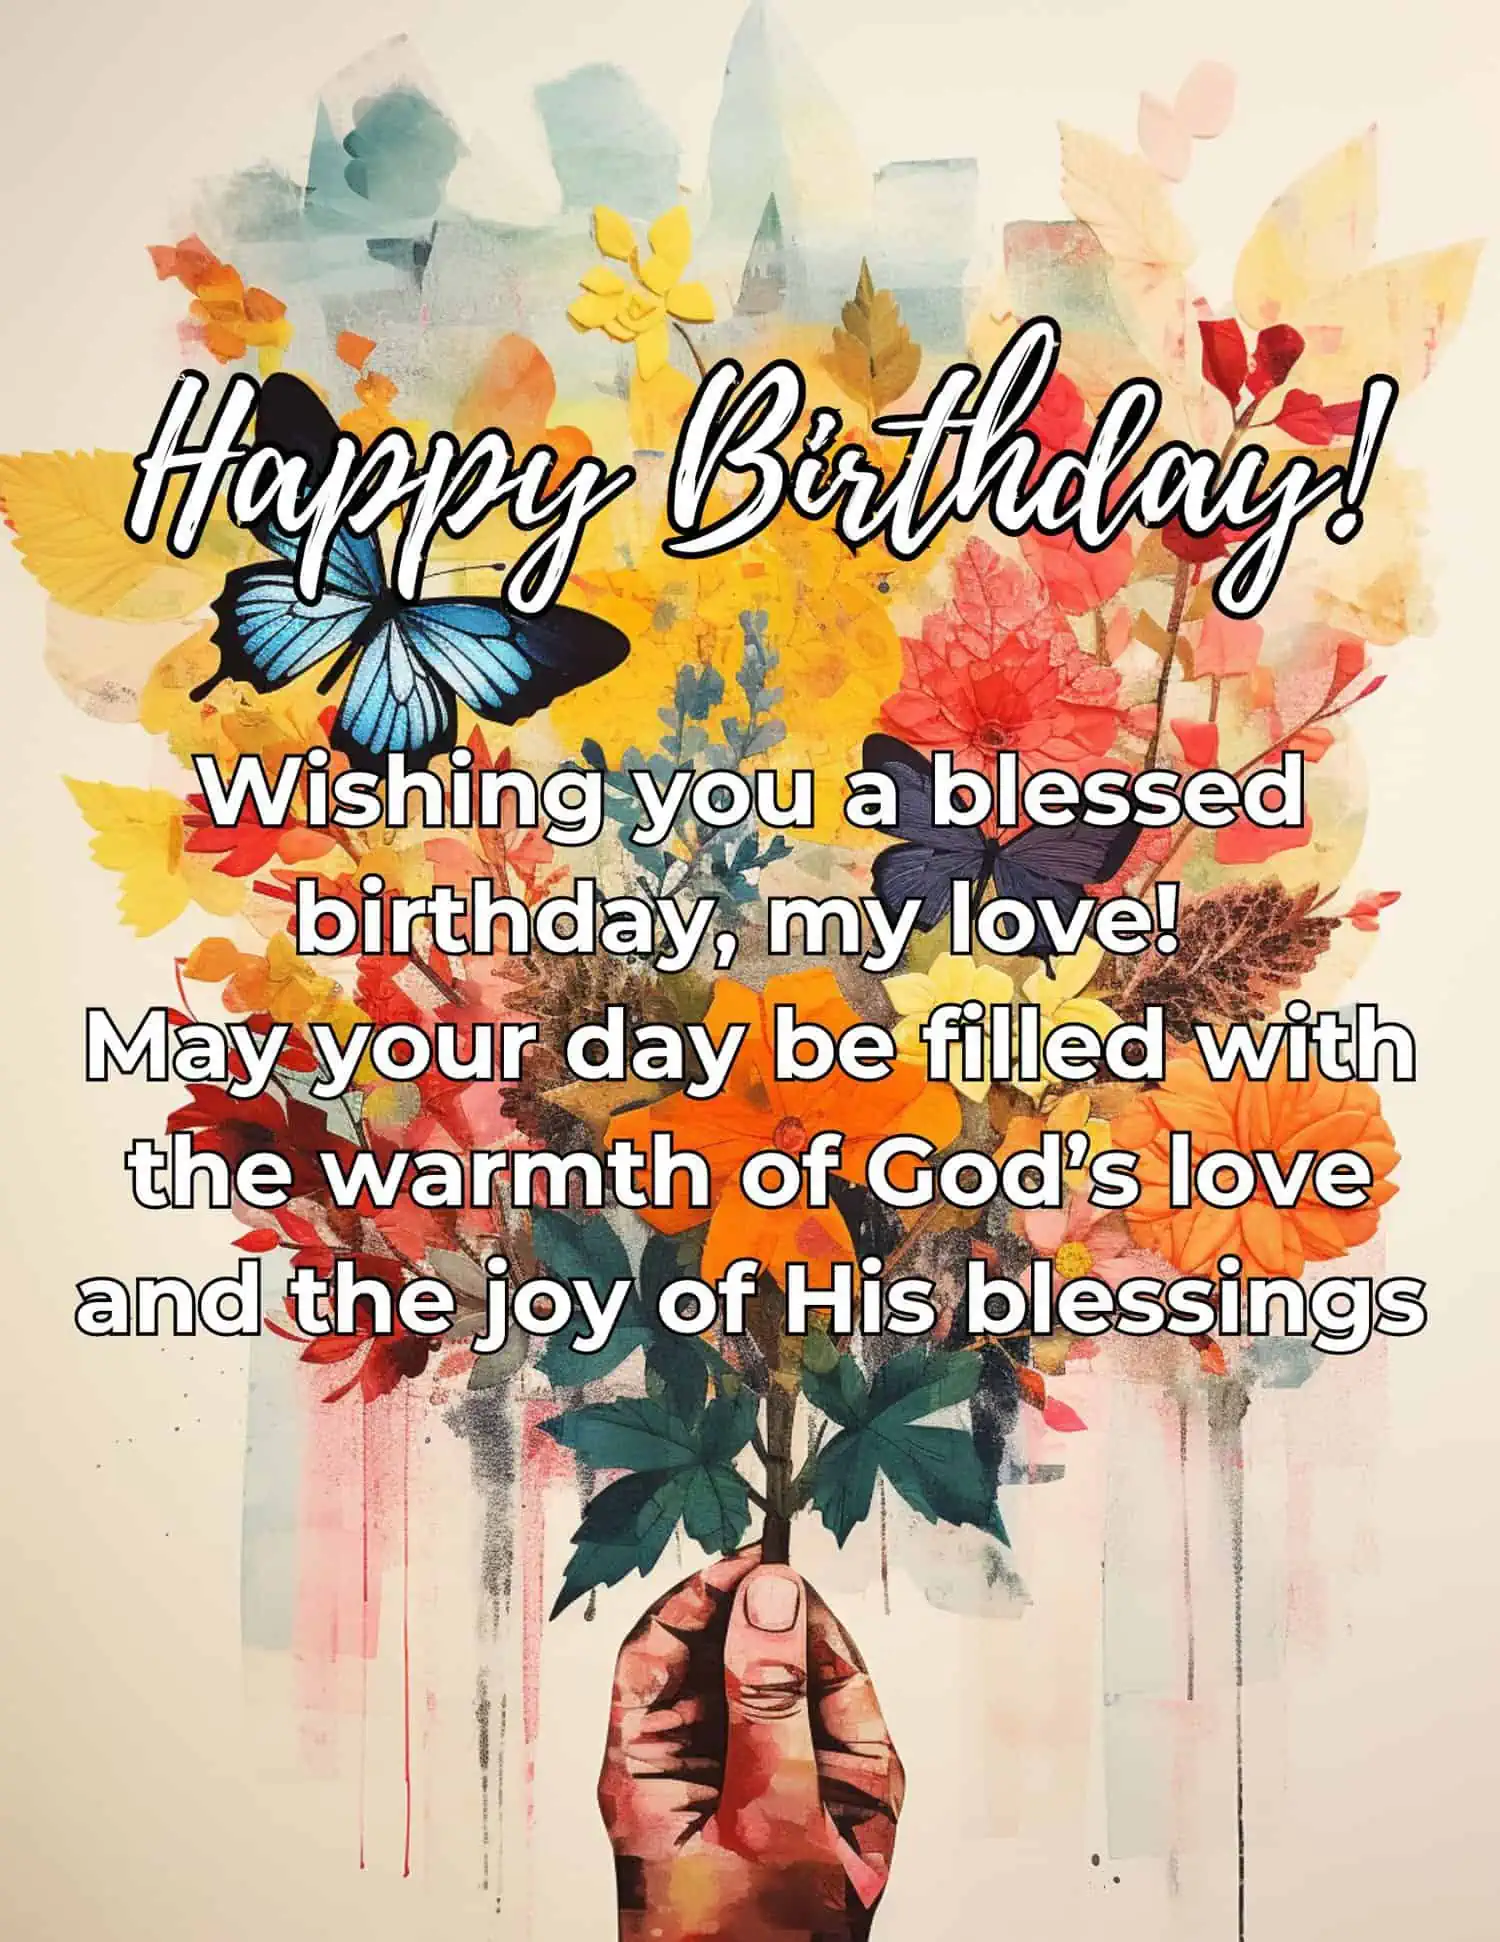 Spiritual and heartfelt birthday wishes for your loved one.